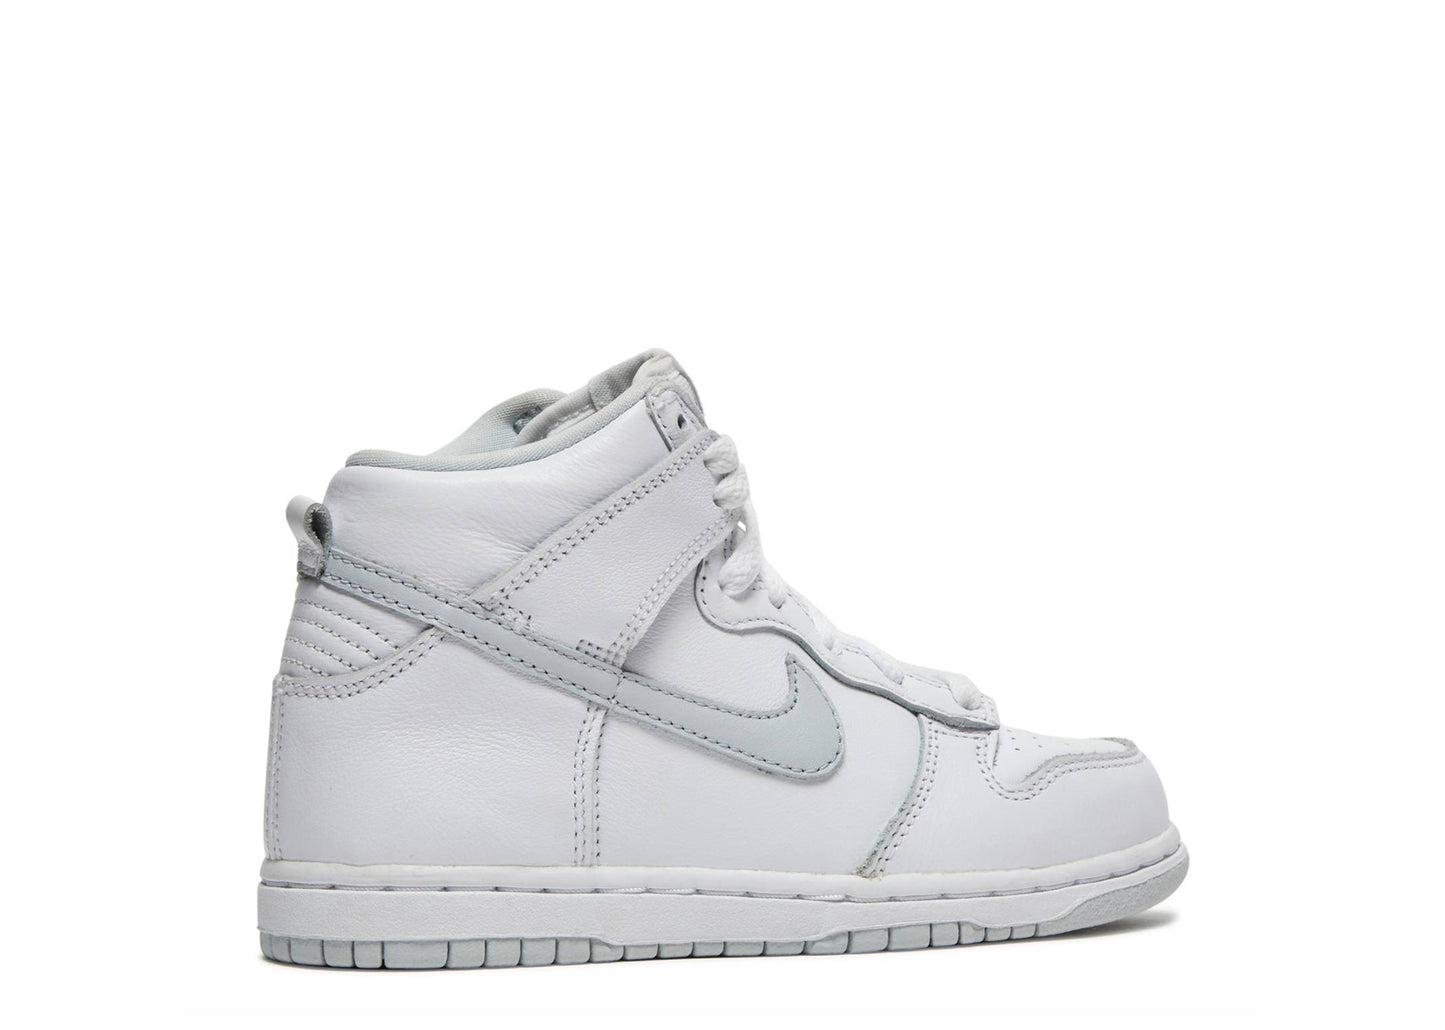 Nike Dunk High SP PS "White/Pure Platinum"